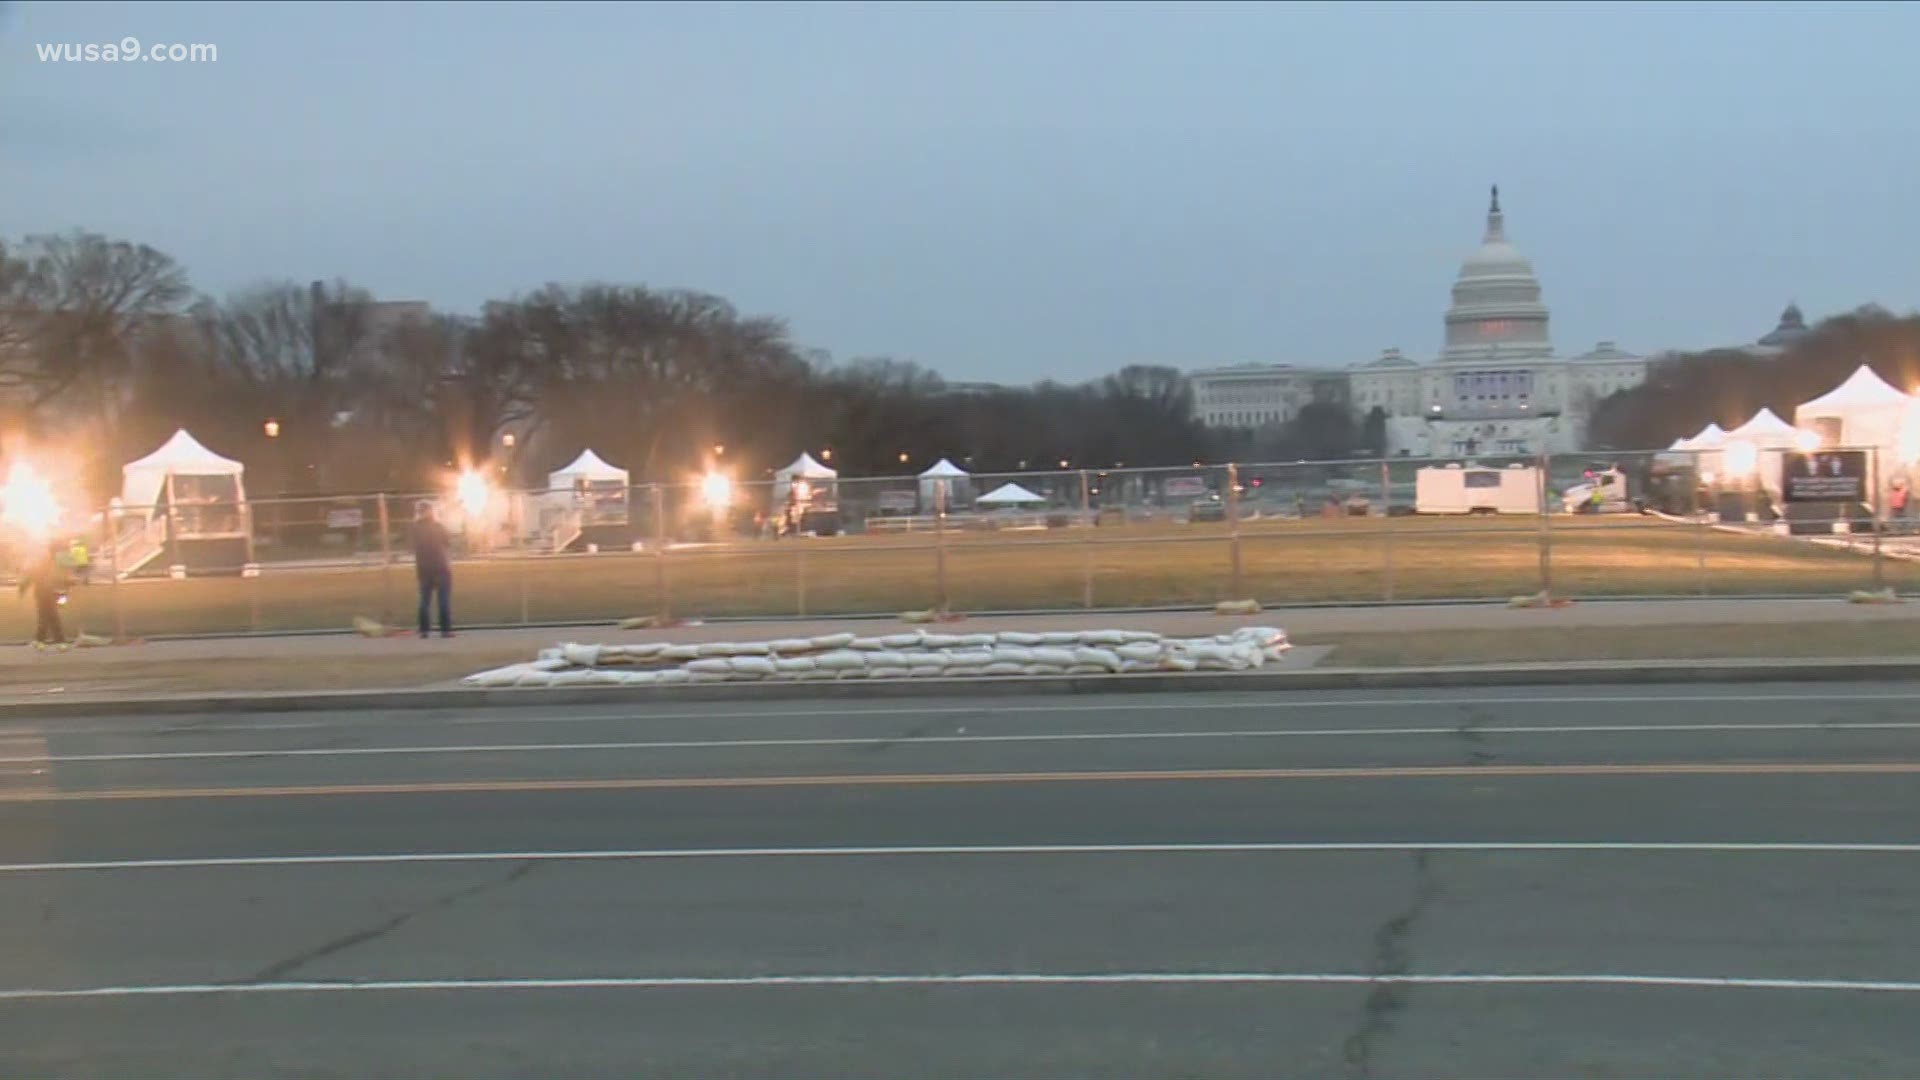 Fences and other security measures are in place as Inauguration day nears.